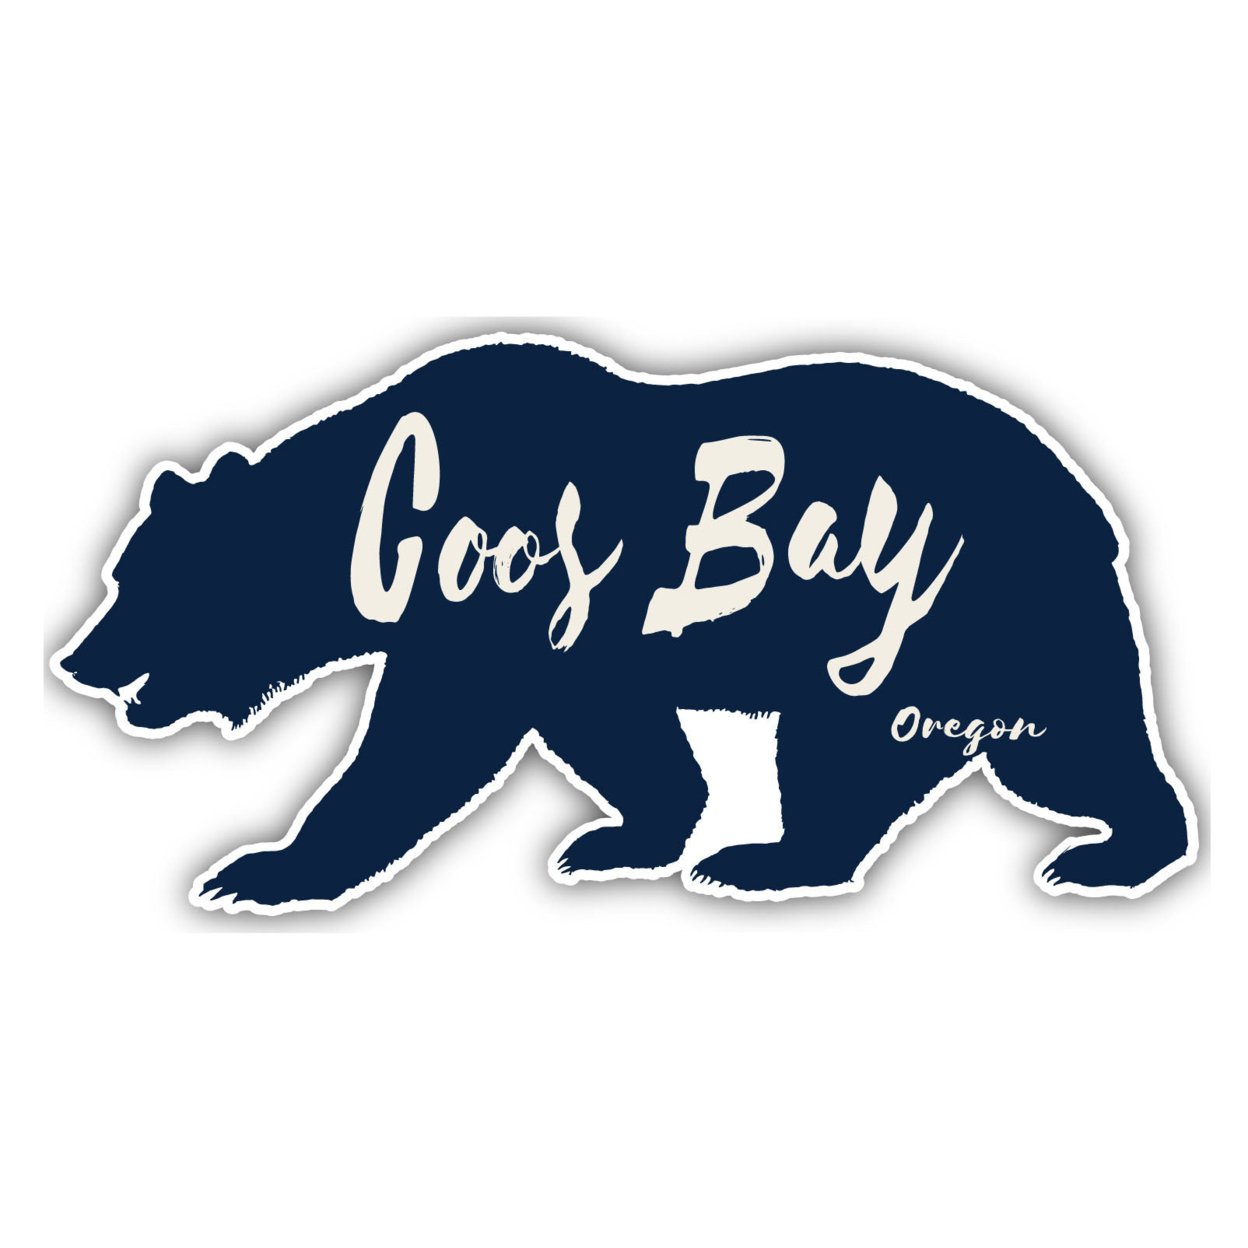 Coos Bay Oregon Souvenir Decorative Stickers (Choose Theme And Size) - 4-Pack, 10-Inch, Adventures Awaits